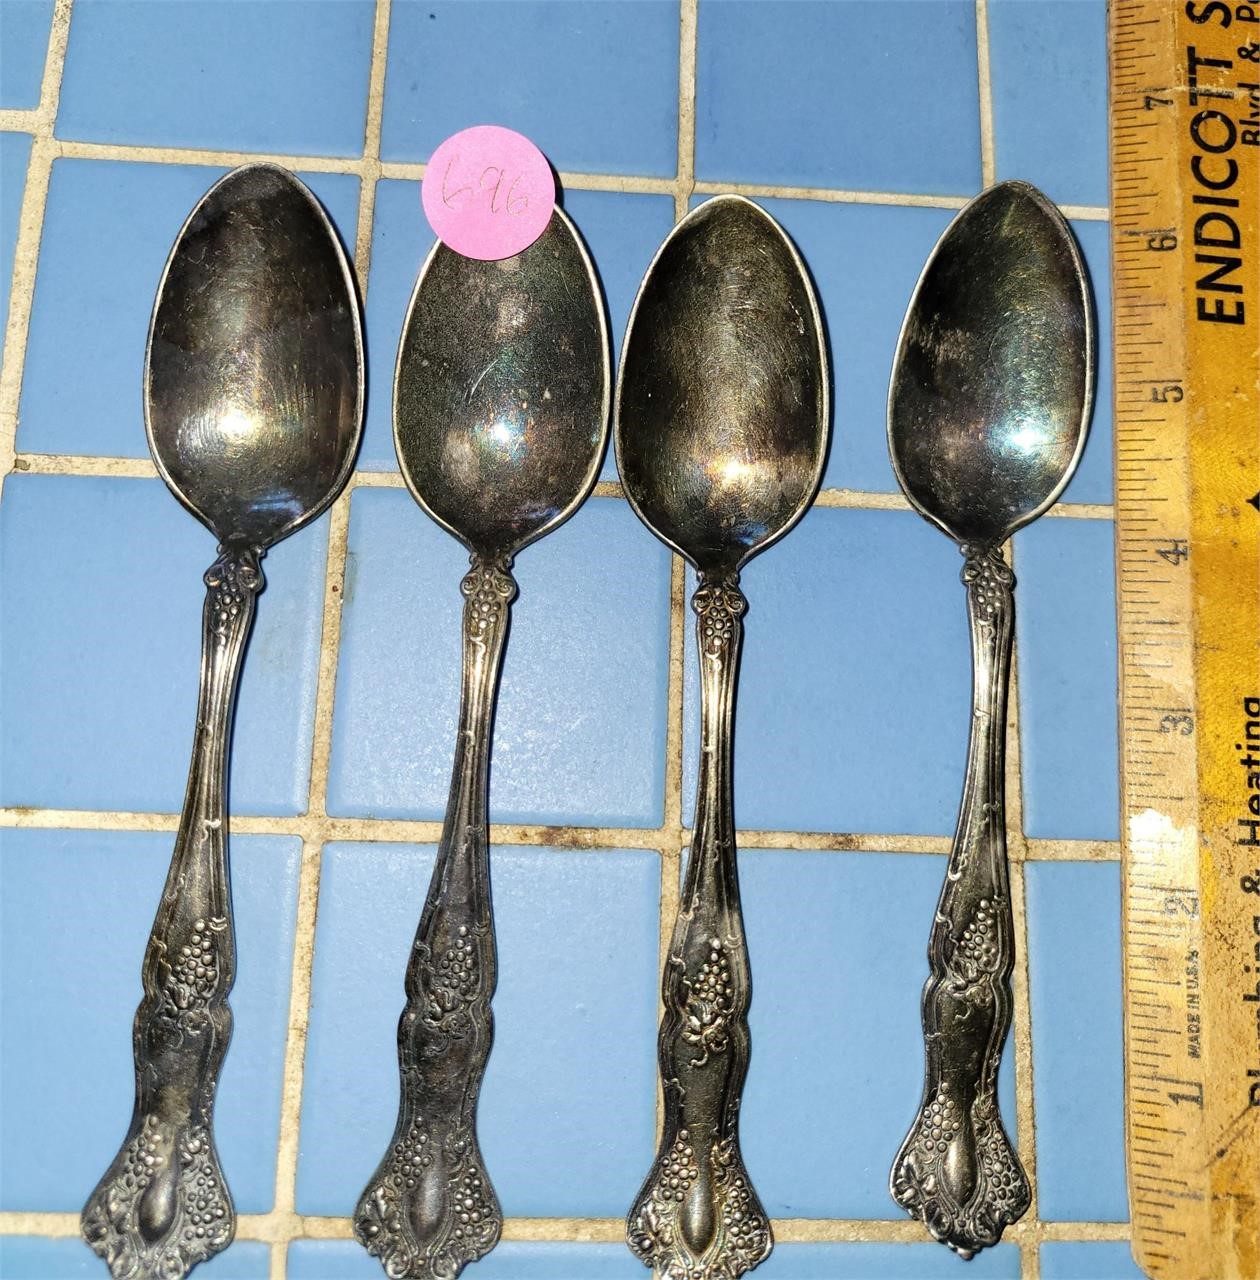 5 set of Spoons, found 1 after the picture